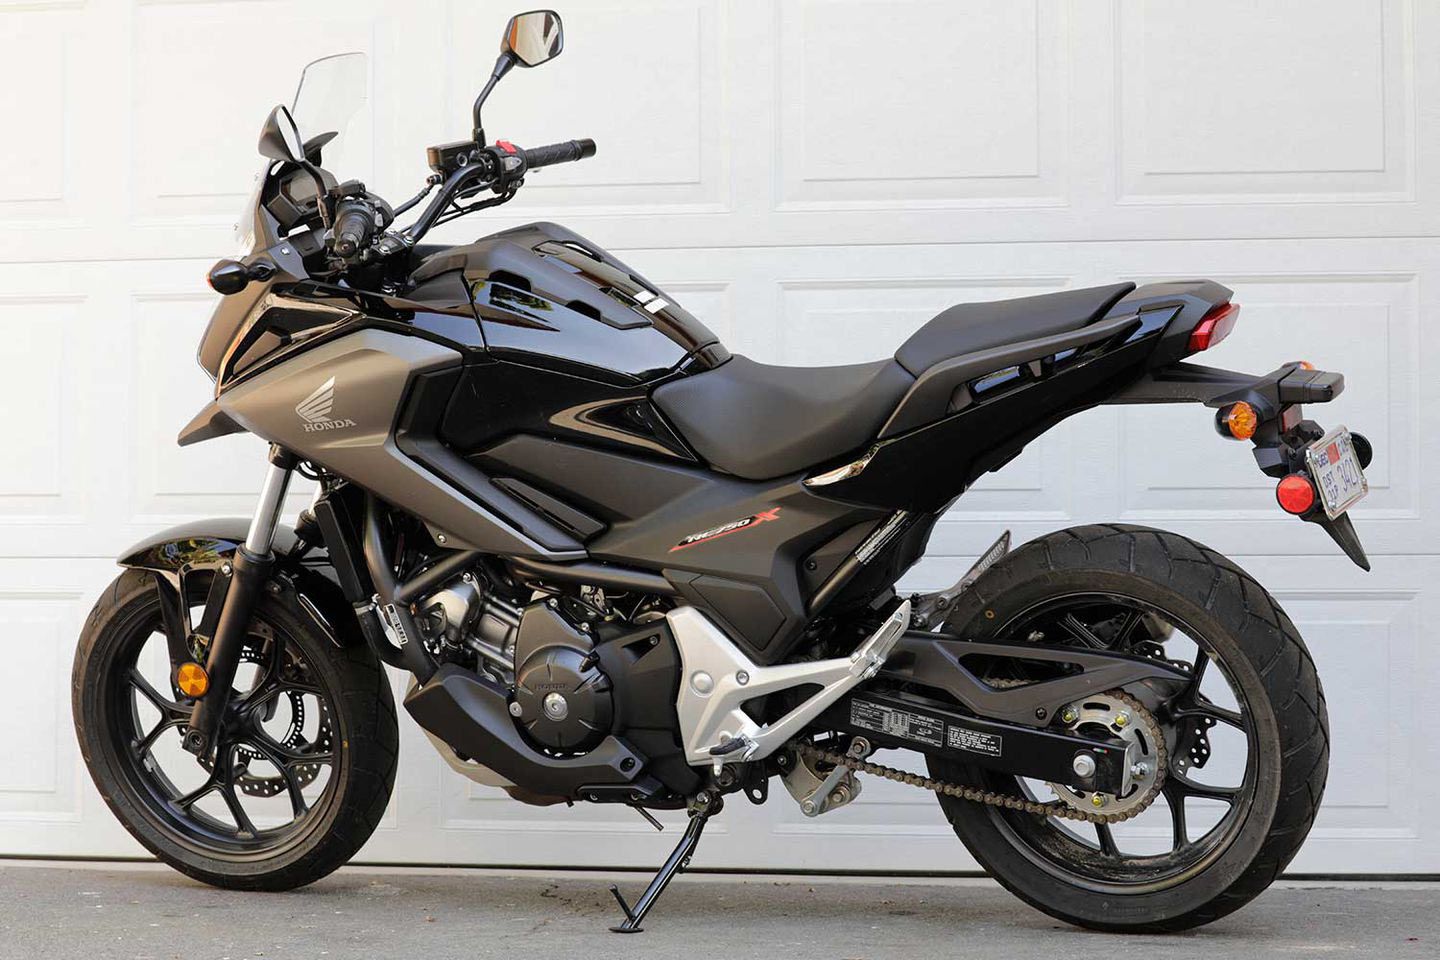 Honda’s NC750X with DCT is a smooth, convenient around-town option for two-up rides.